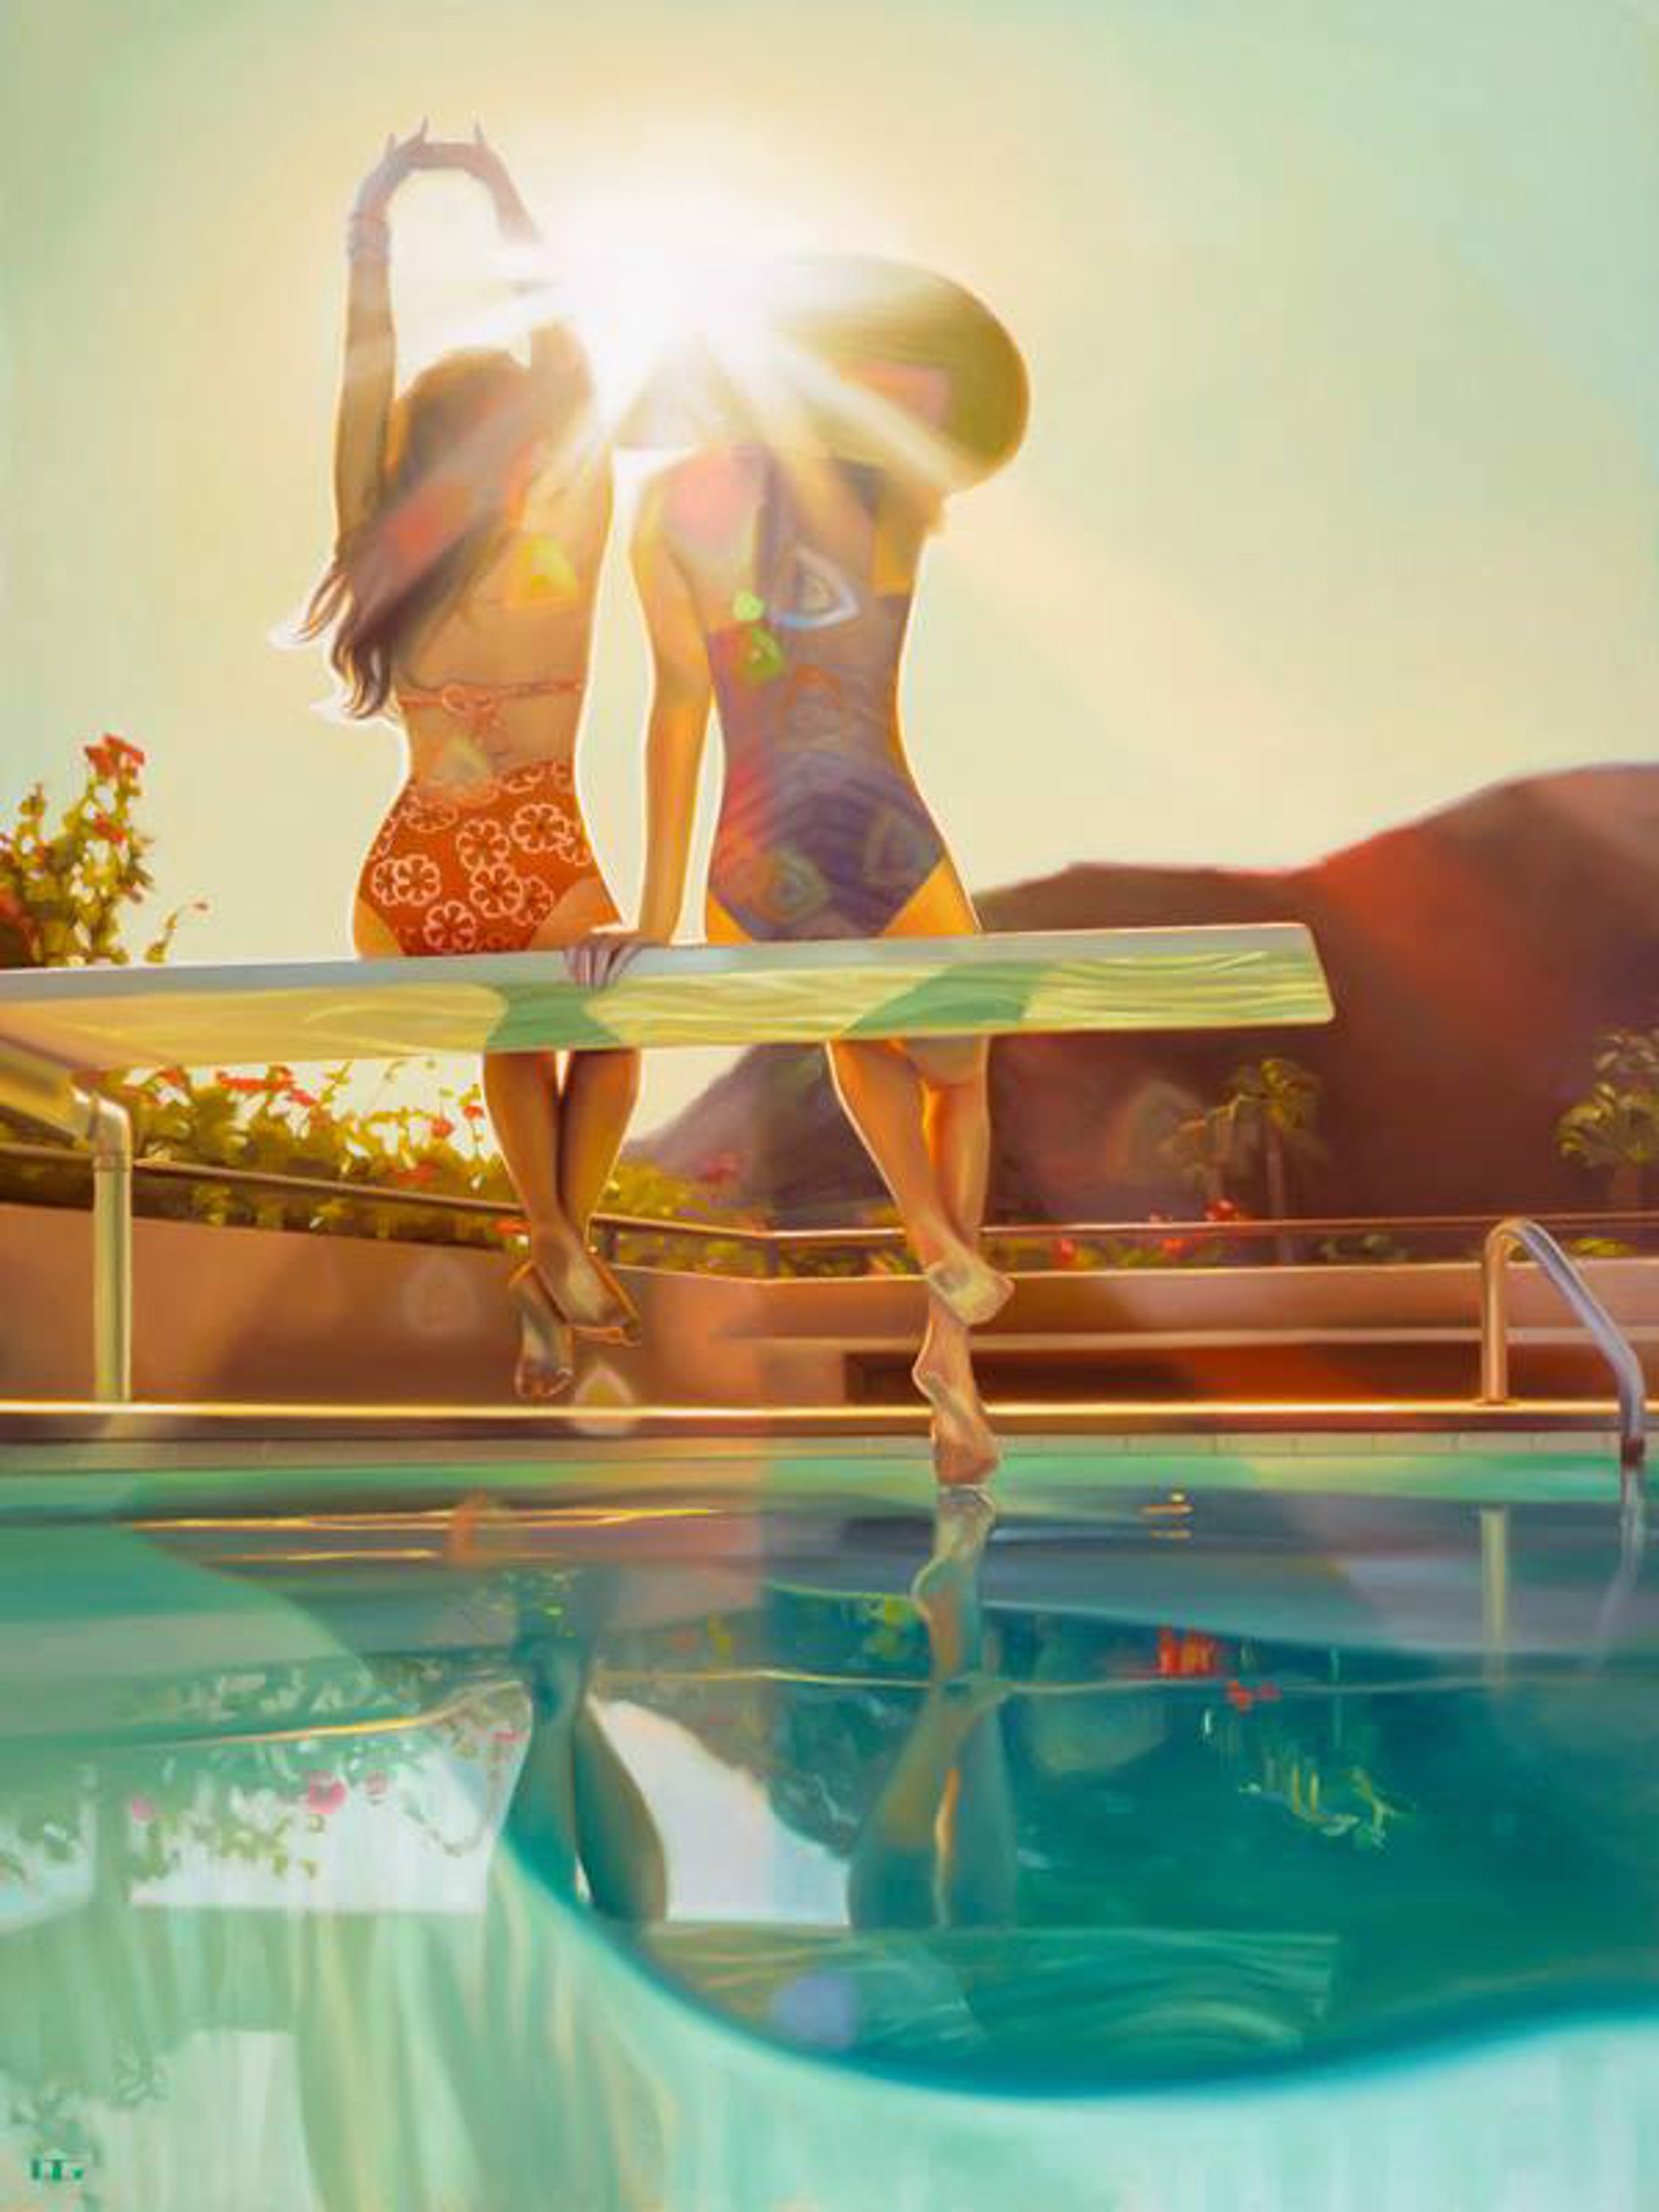 Sun Worshippers by Carrie Graber